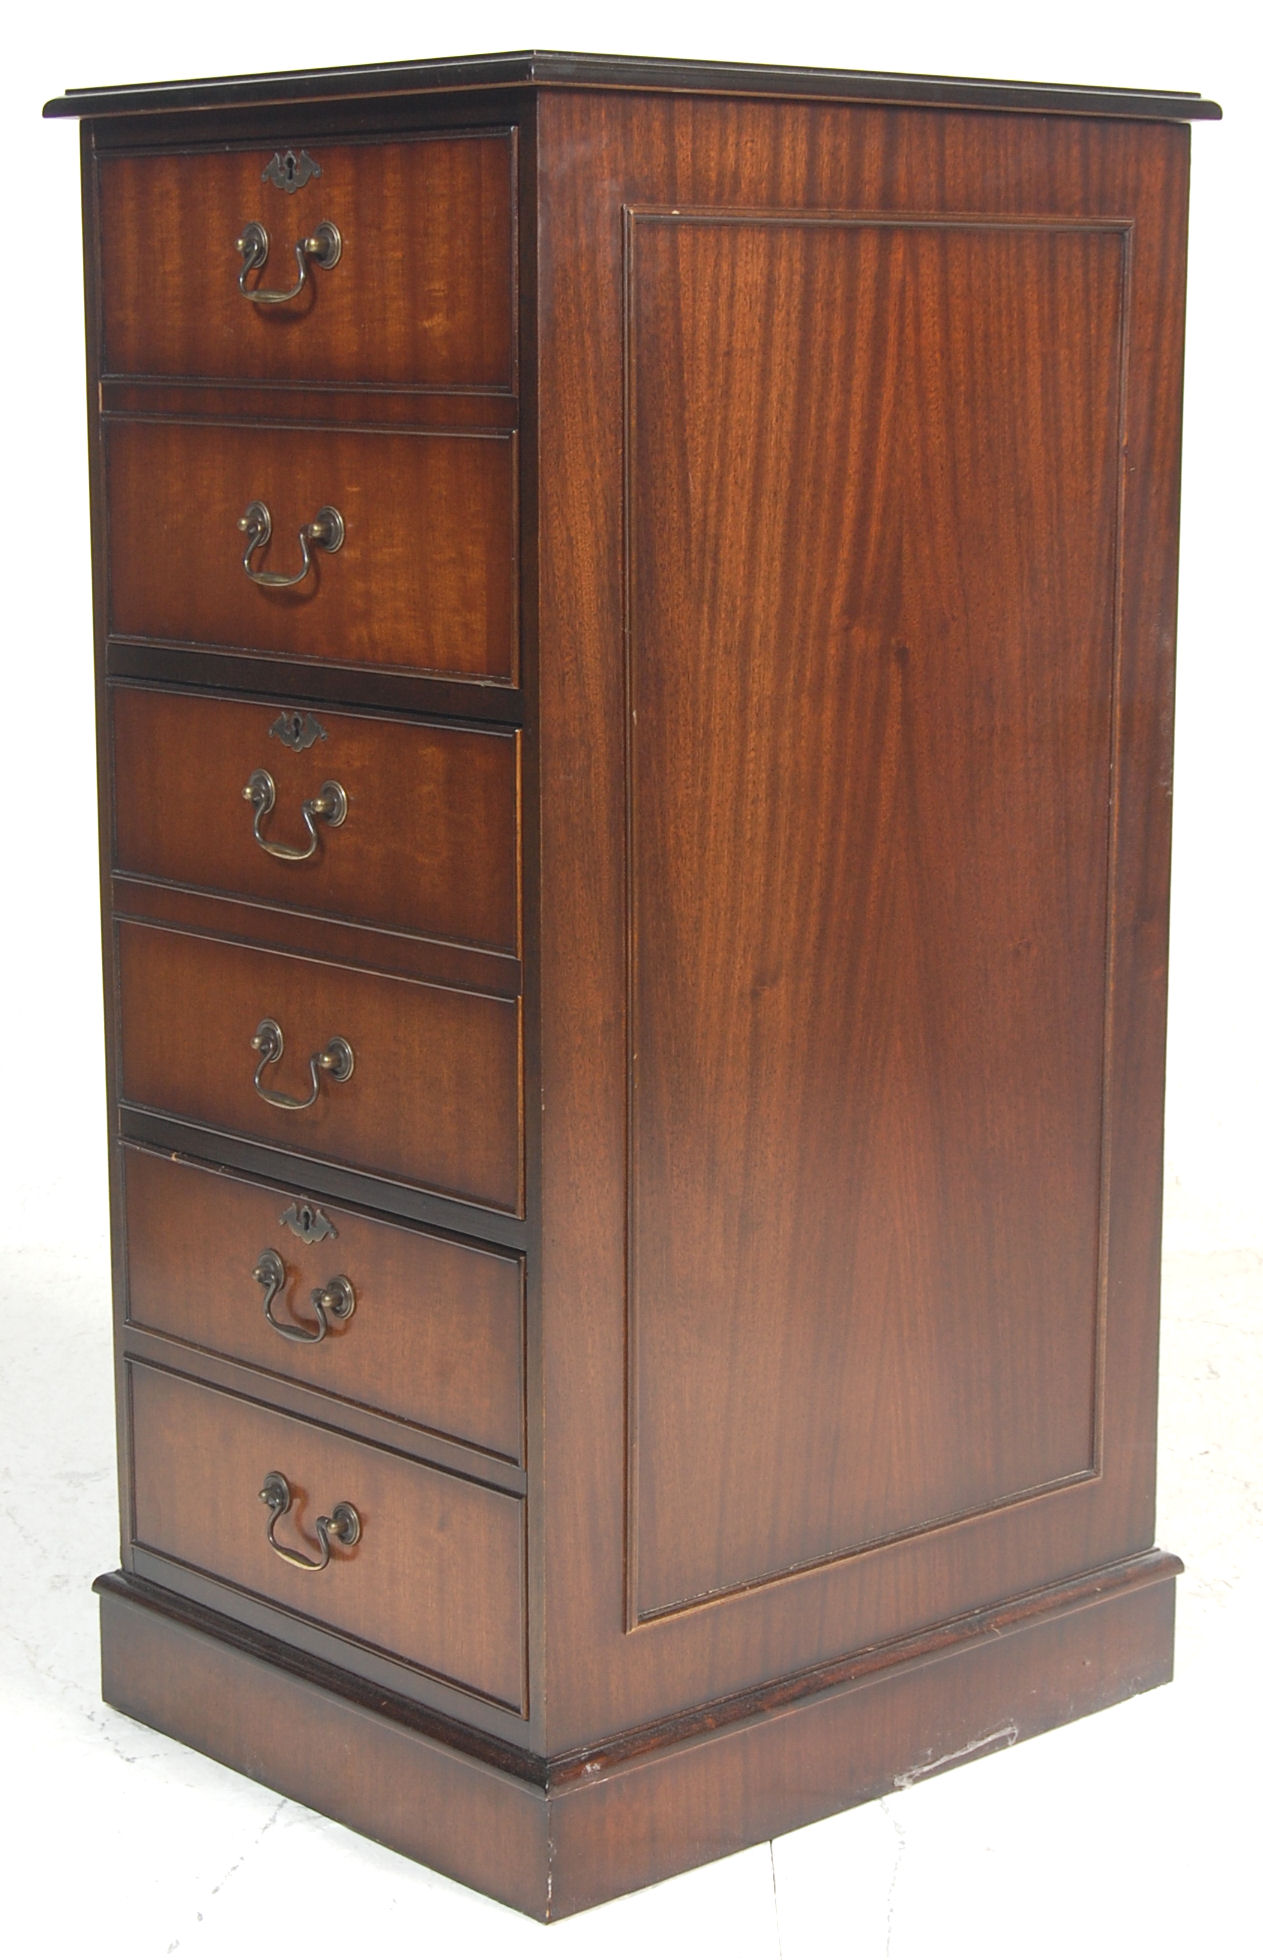 ANTIQUE STYLE MAHOGANY OFFICE FILING CABINET - Image 5 of 5